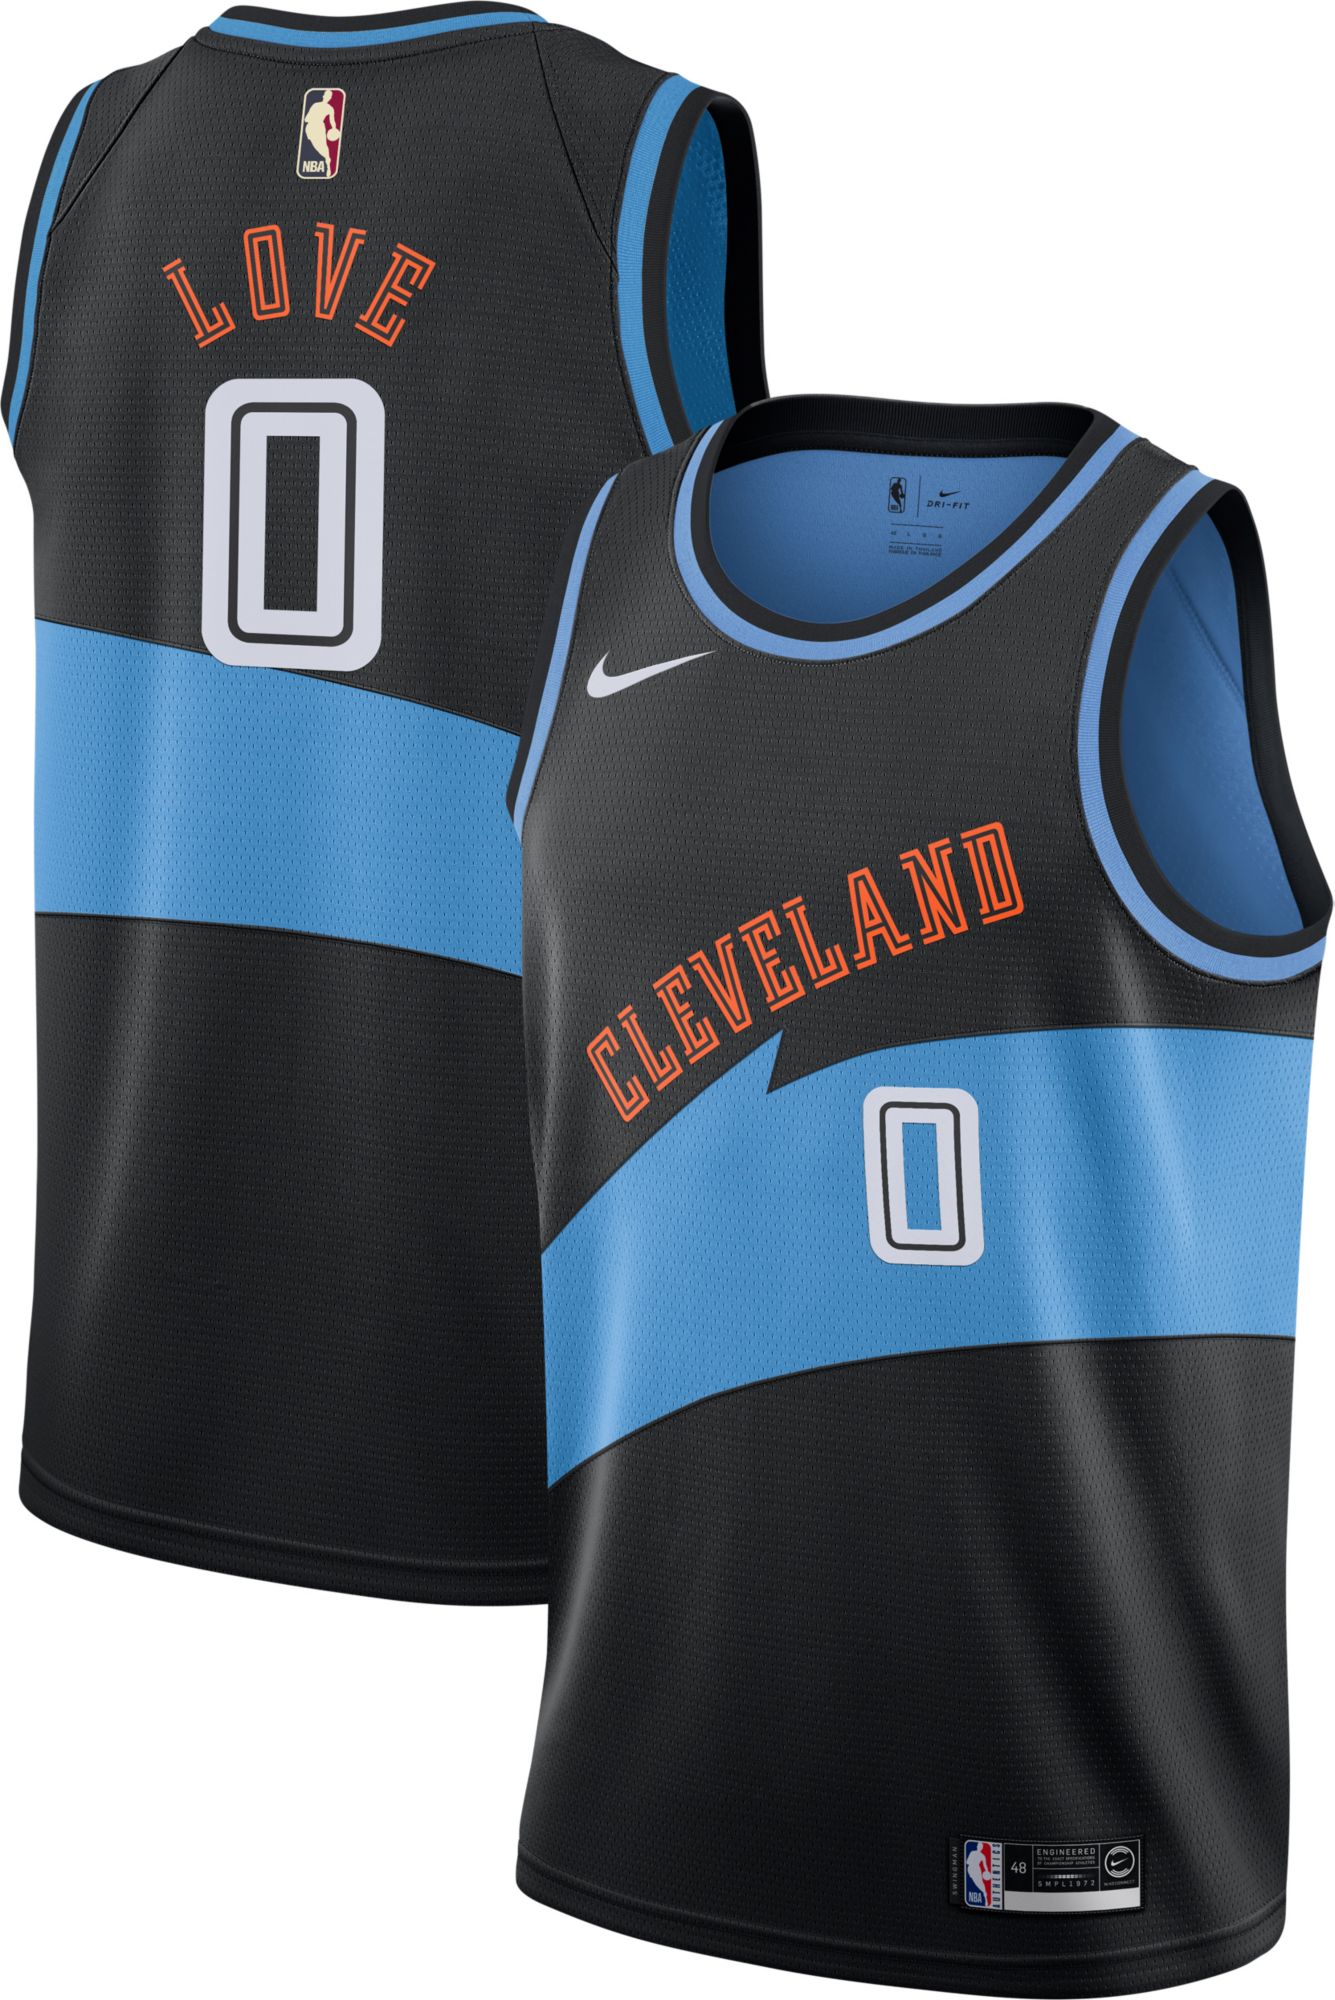 cleveland cavaliers classic jersey